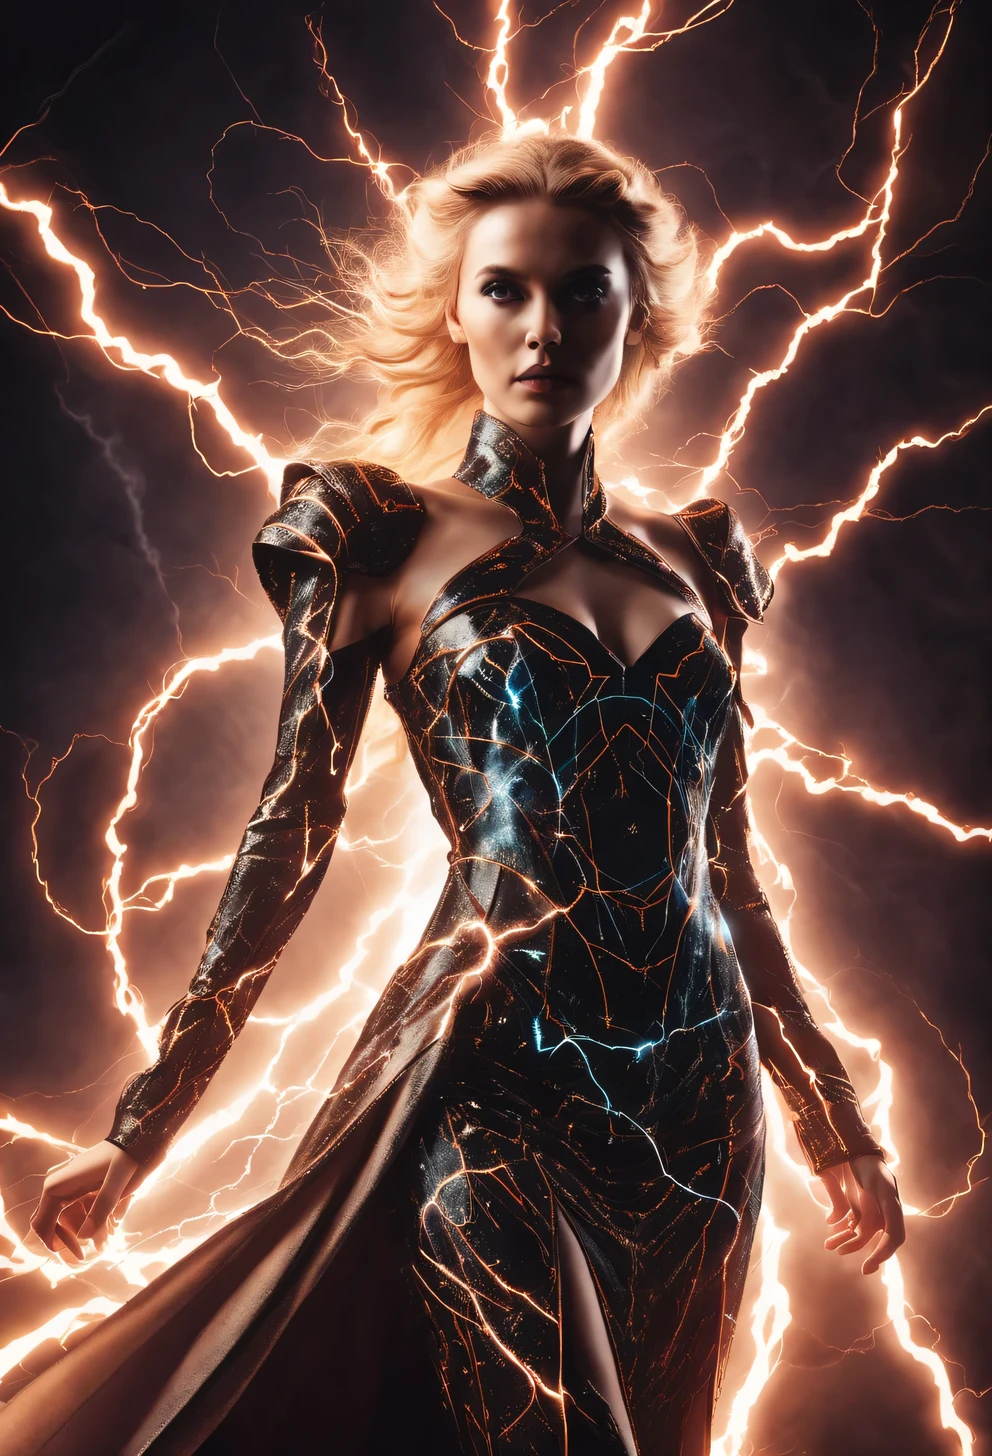 in a fictional fantasy world against the backdrop of a fantastic dark landscape, Romanesque style women&#39;s dress design made entirely from electrical network, dress made of the finest electrical discharges and lightning, electrical discharges and lightning intertwined in a luxurious women&#39;s dress, electrical clothing design, lightning and discharges on a dark background, high detail, a high resolution, high contrast, electricity on a dark background, photorealistic, a high resolution